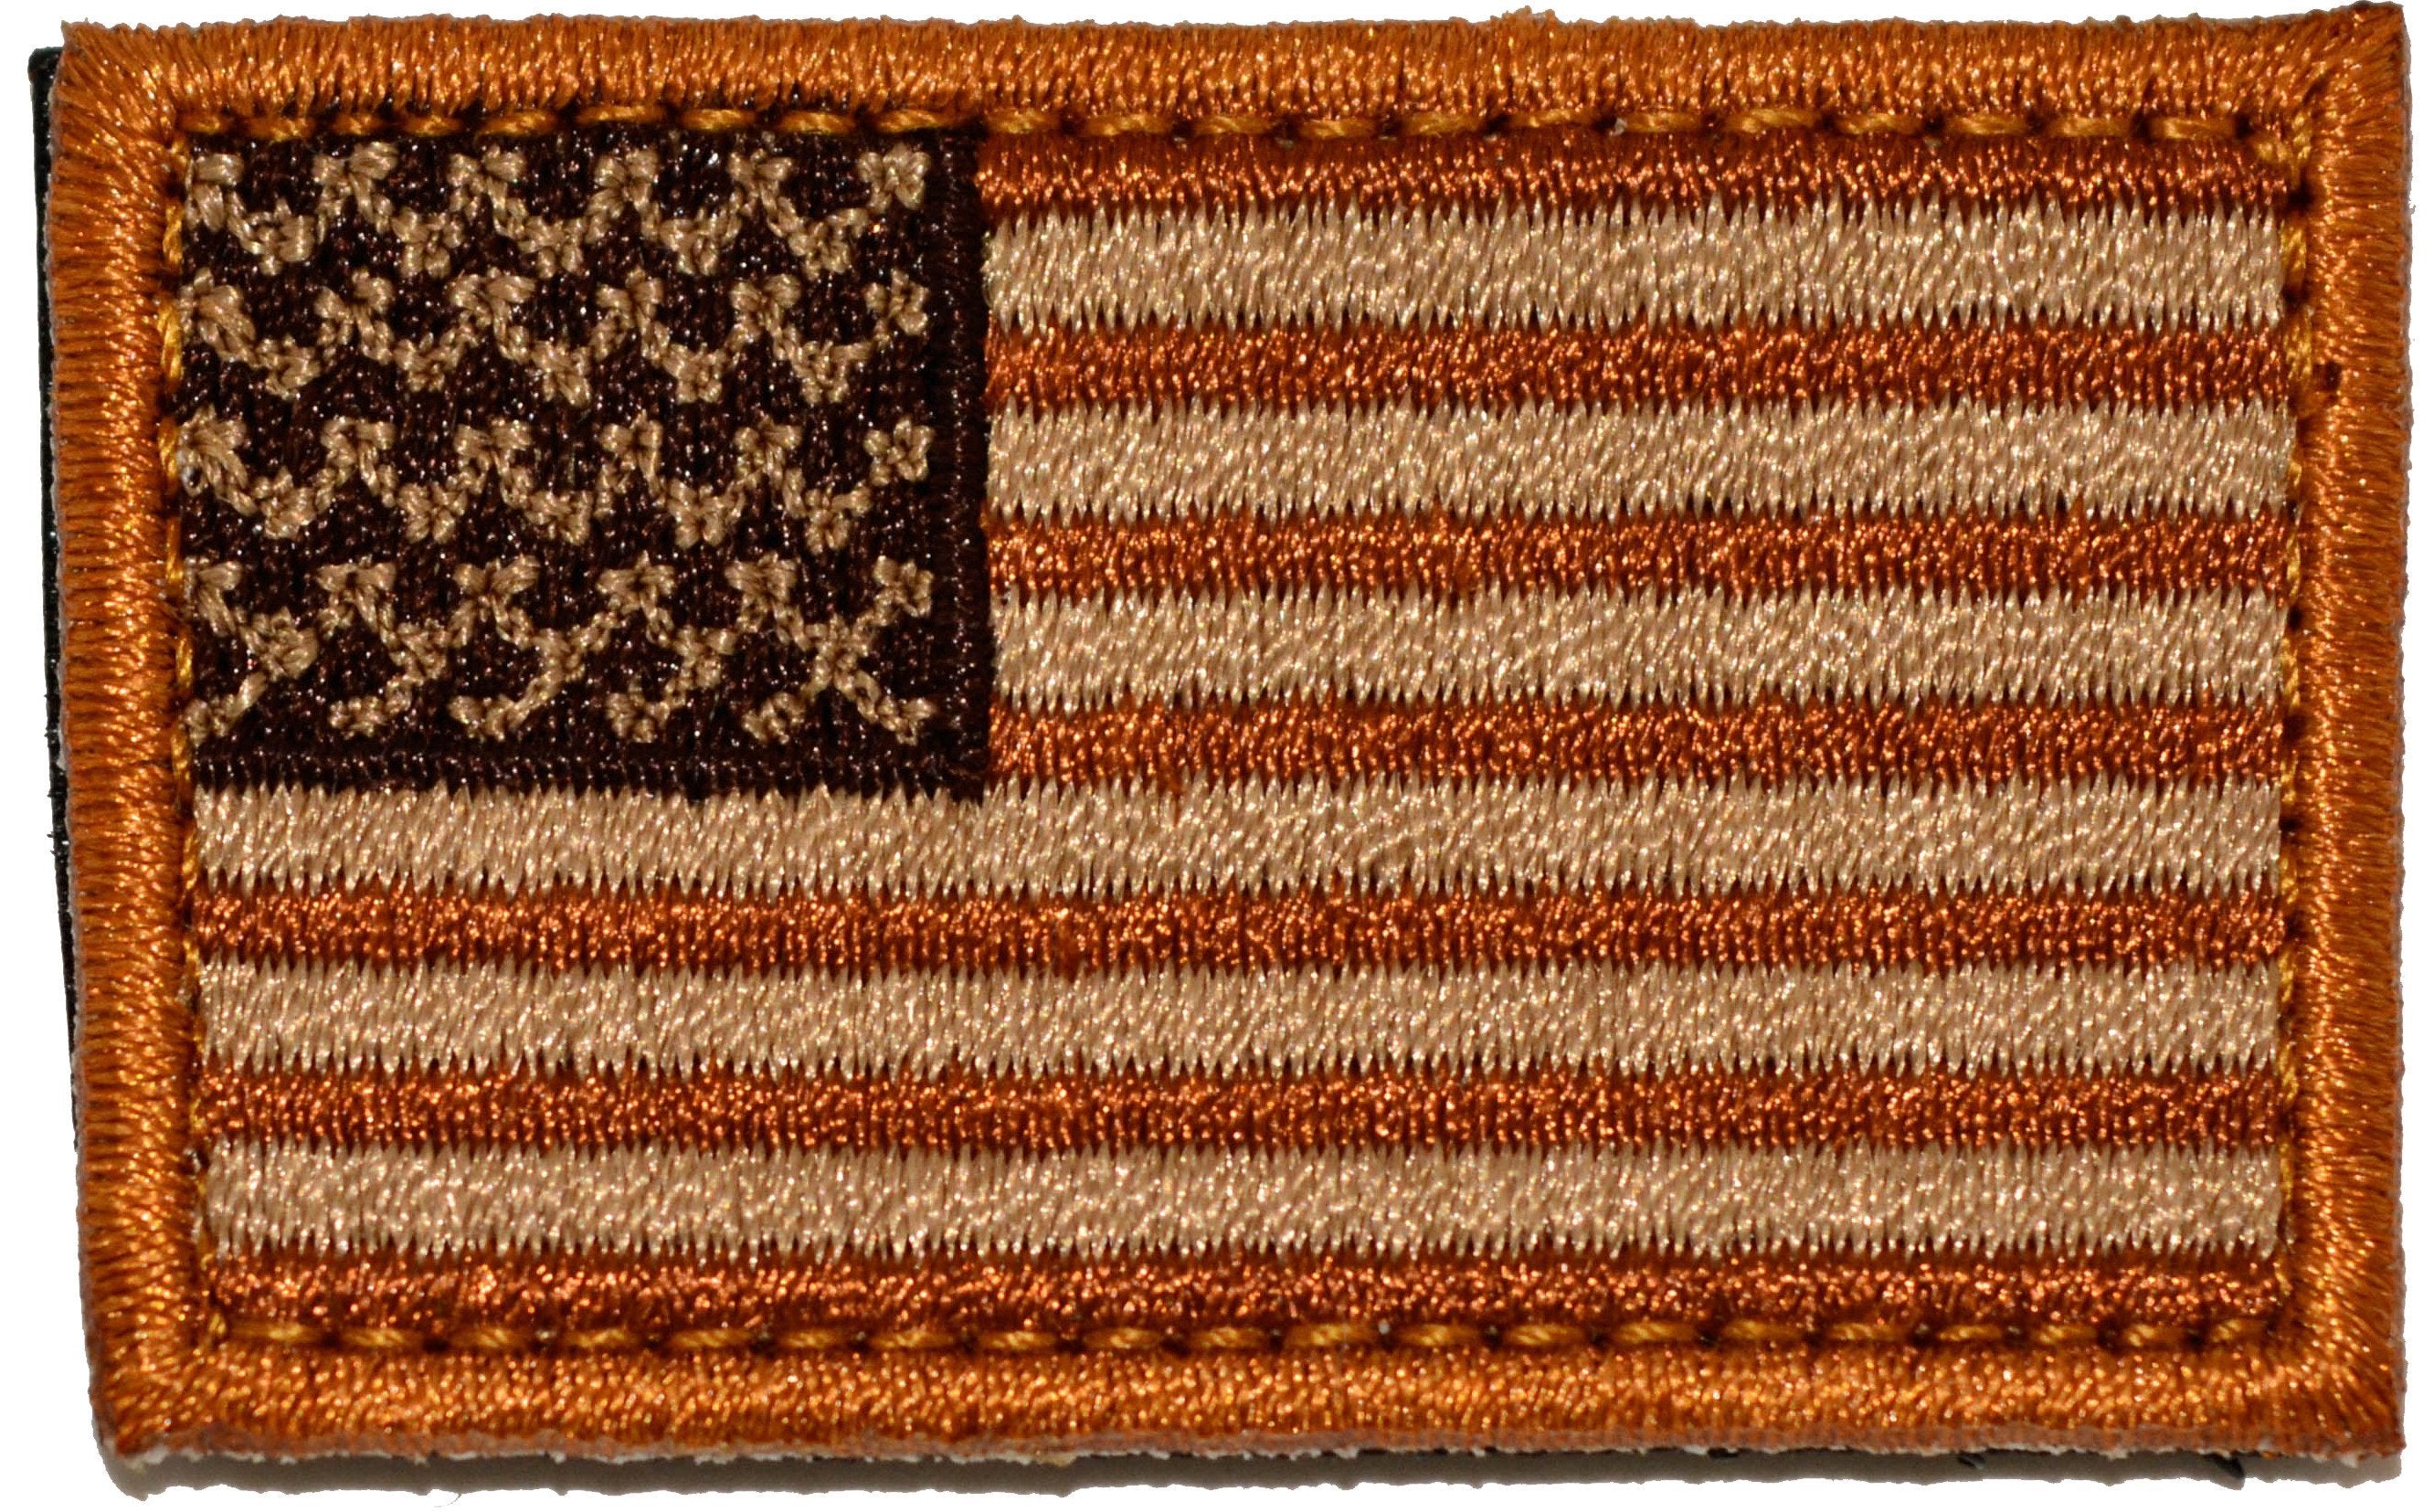 American Flag Desert Tan Tactical Velcro Patch Free Shipping 